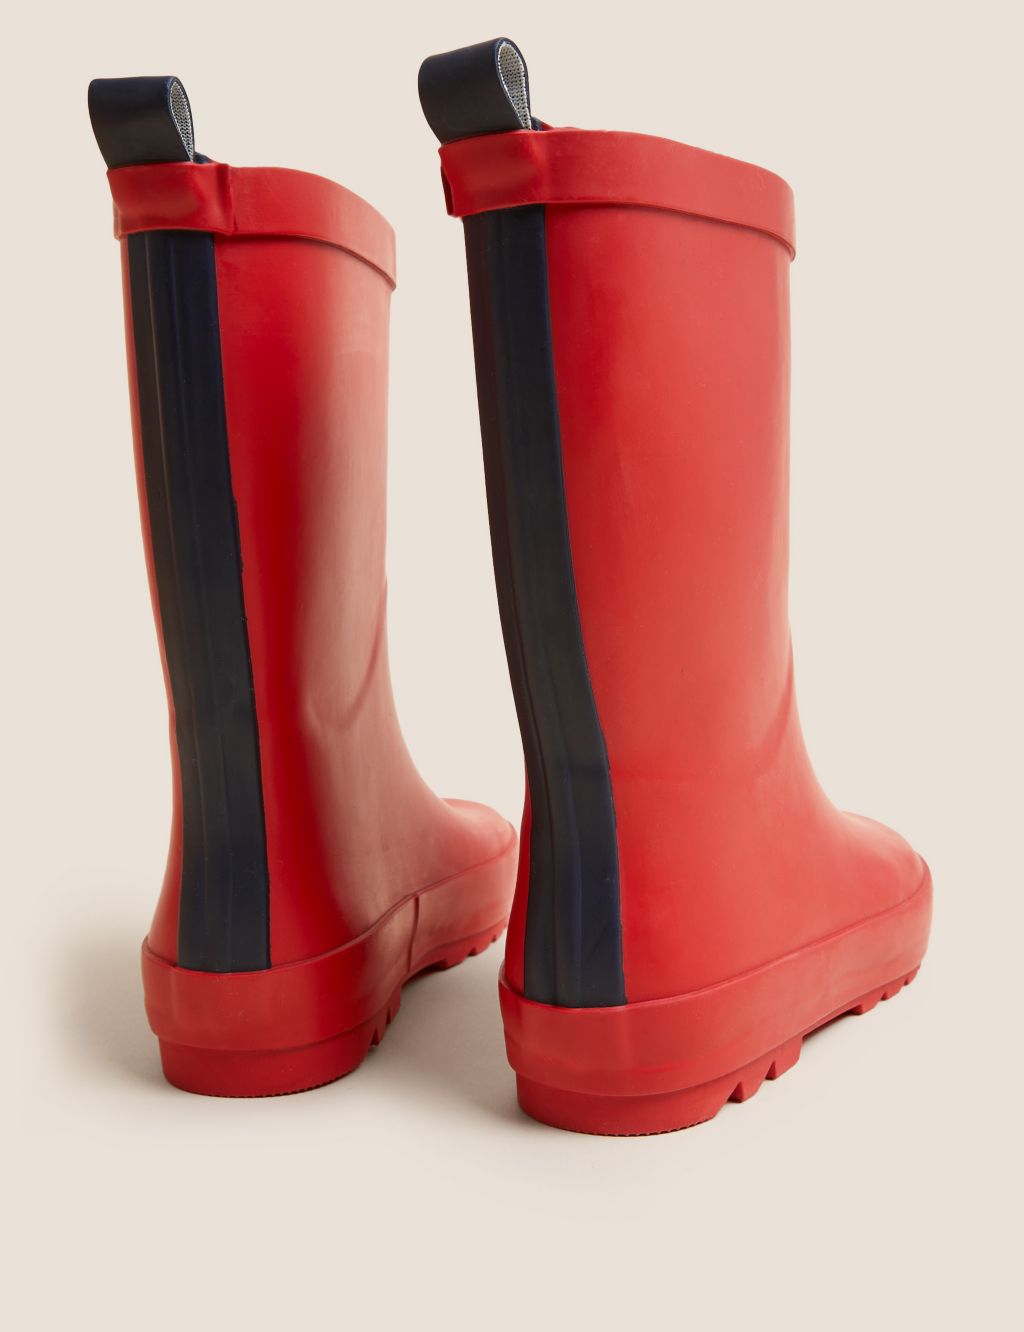 Kids' Plain Welly Boots (3 Small - 2 Large) image 2